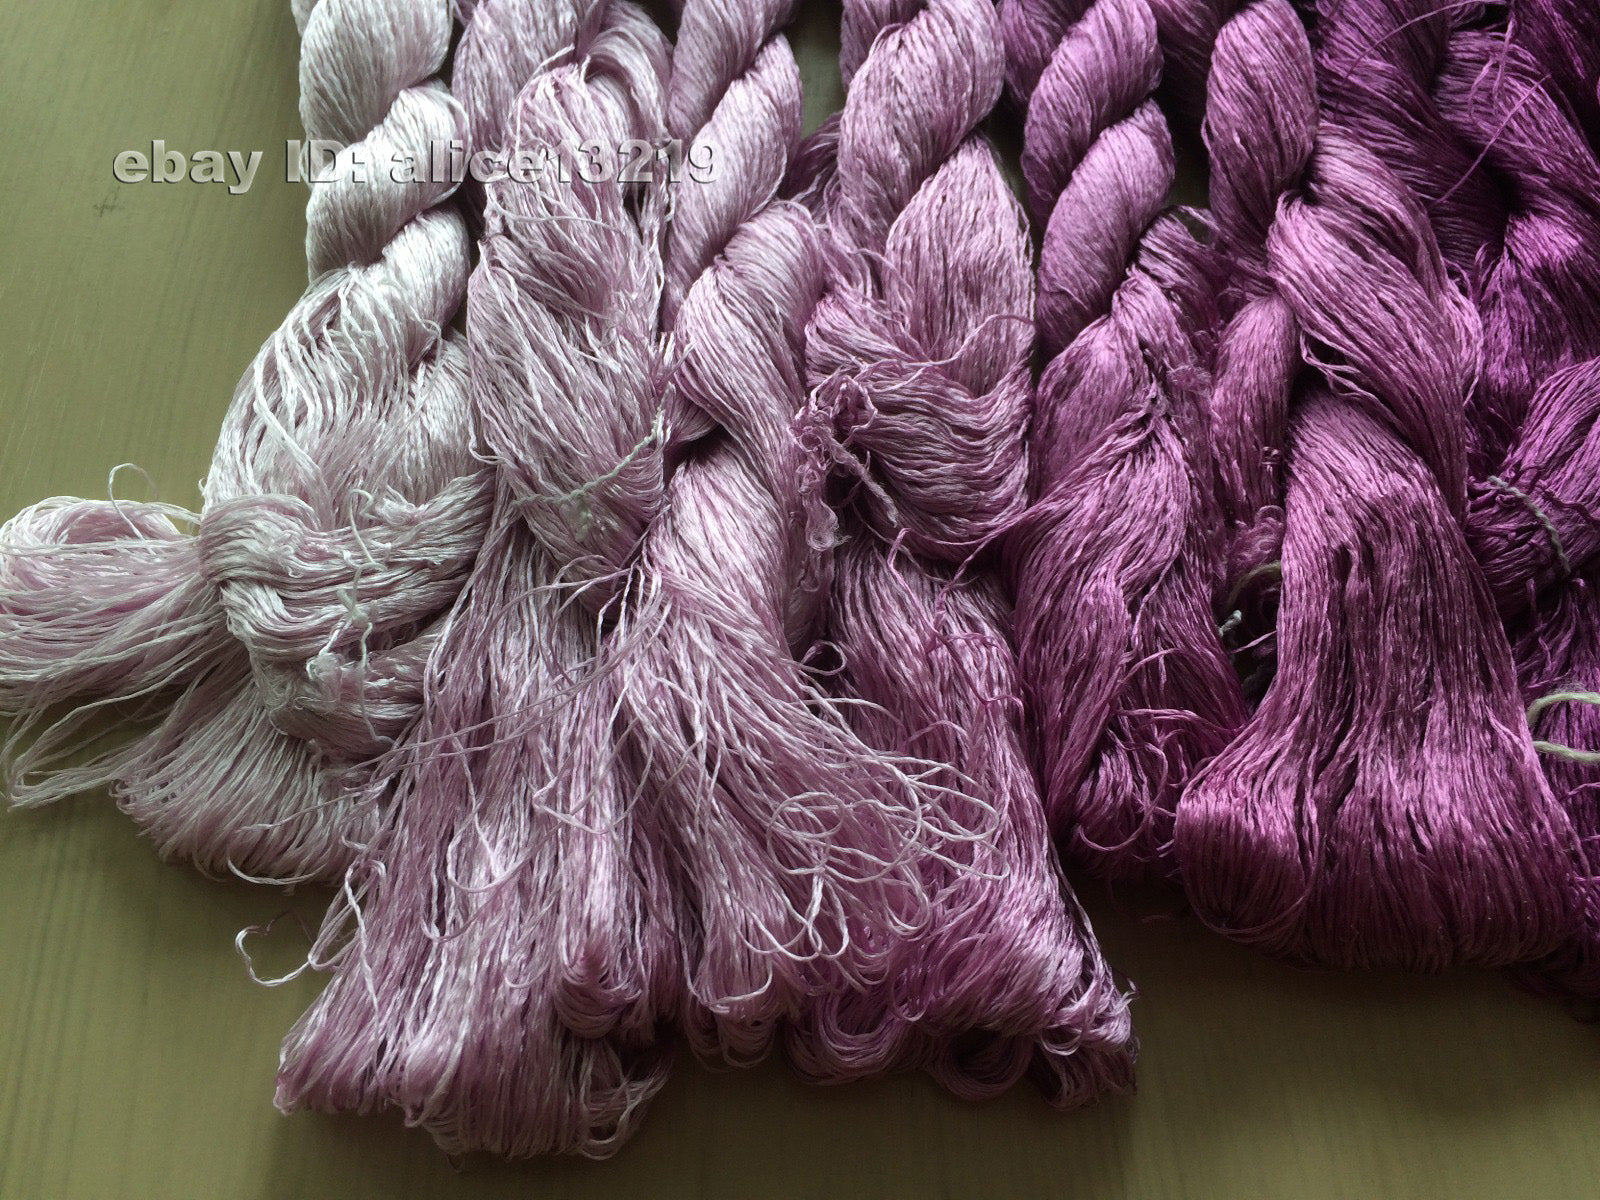 10bundles 100%real mulberry silk,hand-dyed embroidery silk floss/thread N101